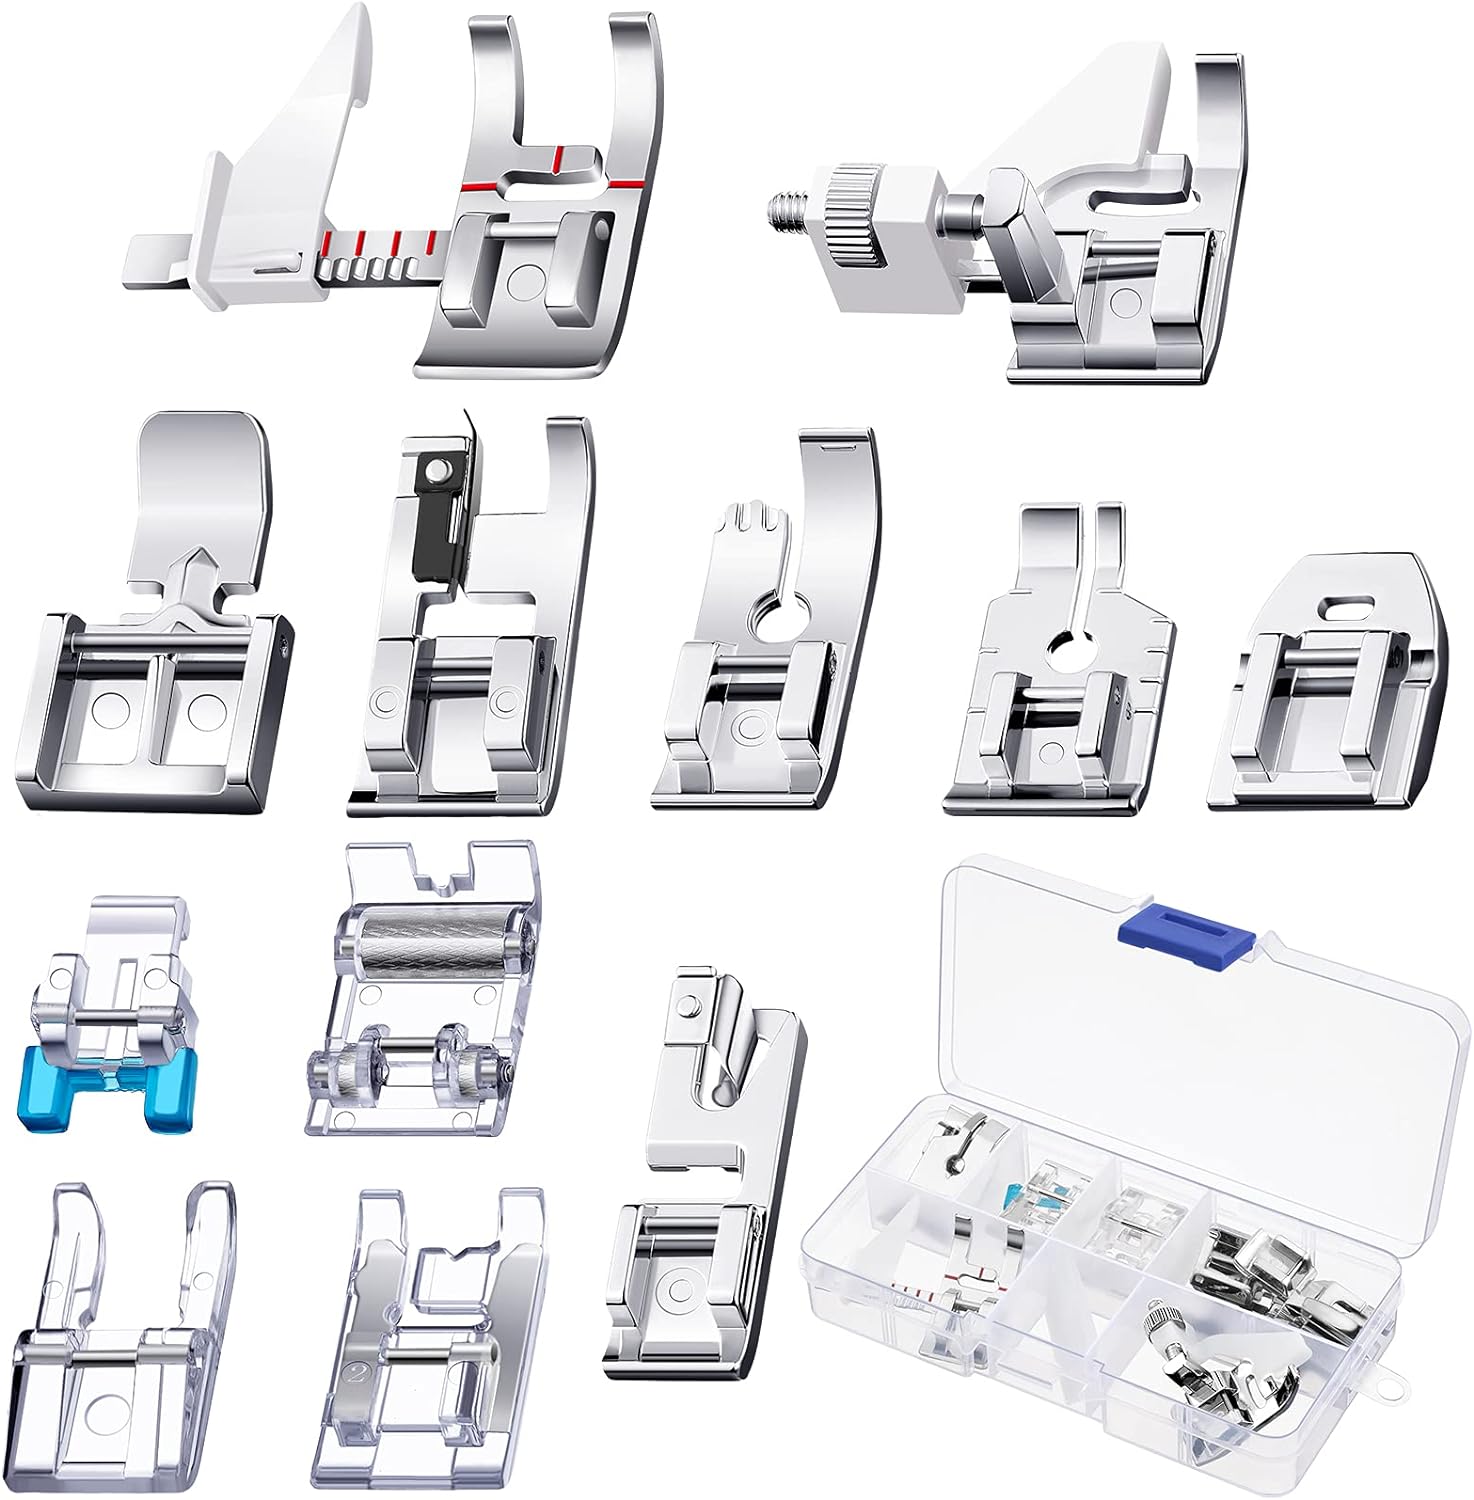 12 Pieces Multifunctional Sewing Presser Foot